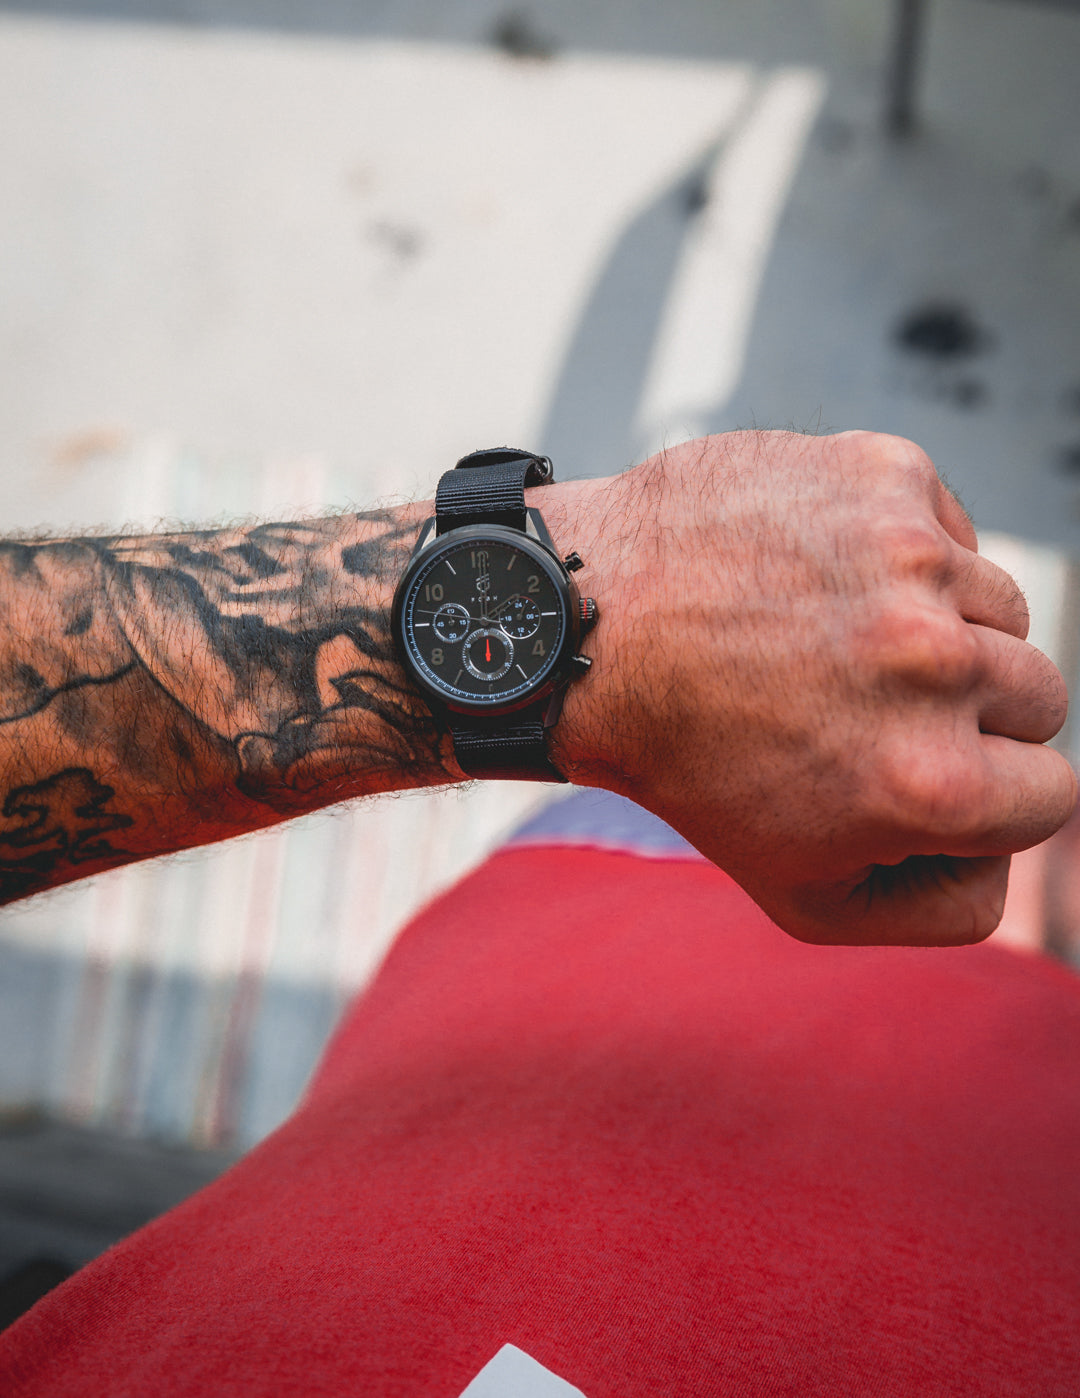 Tattooed men's arm with black watch and red shirt   